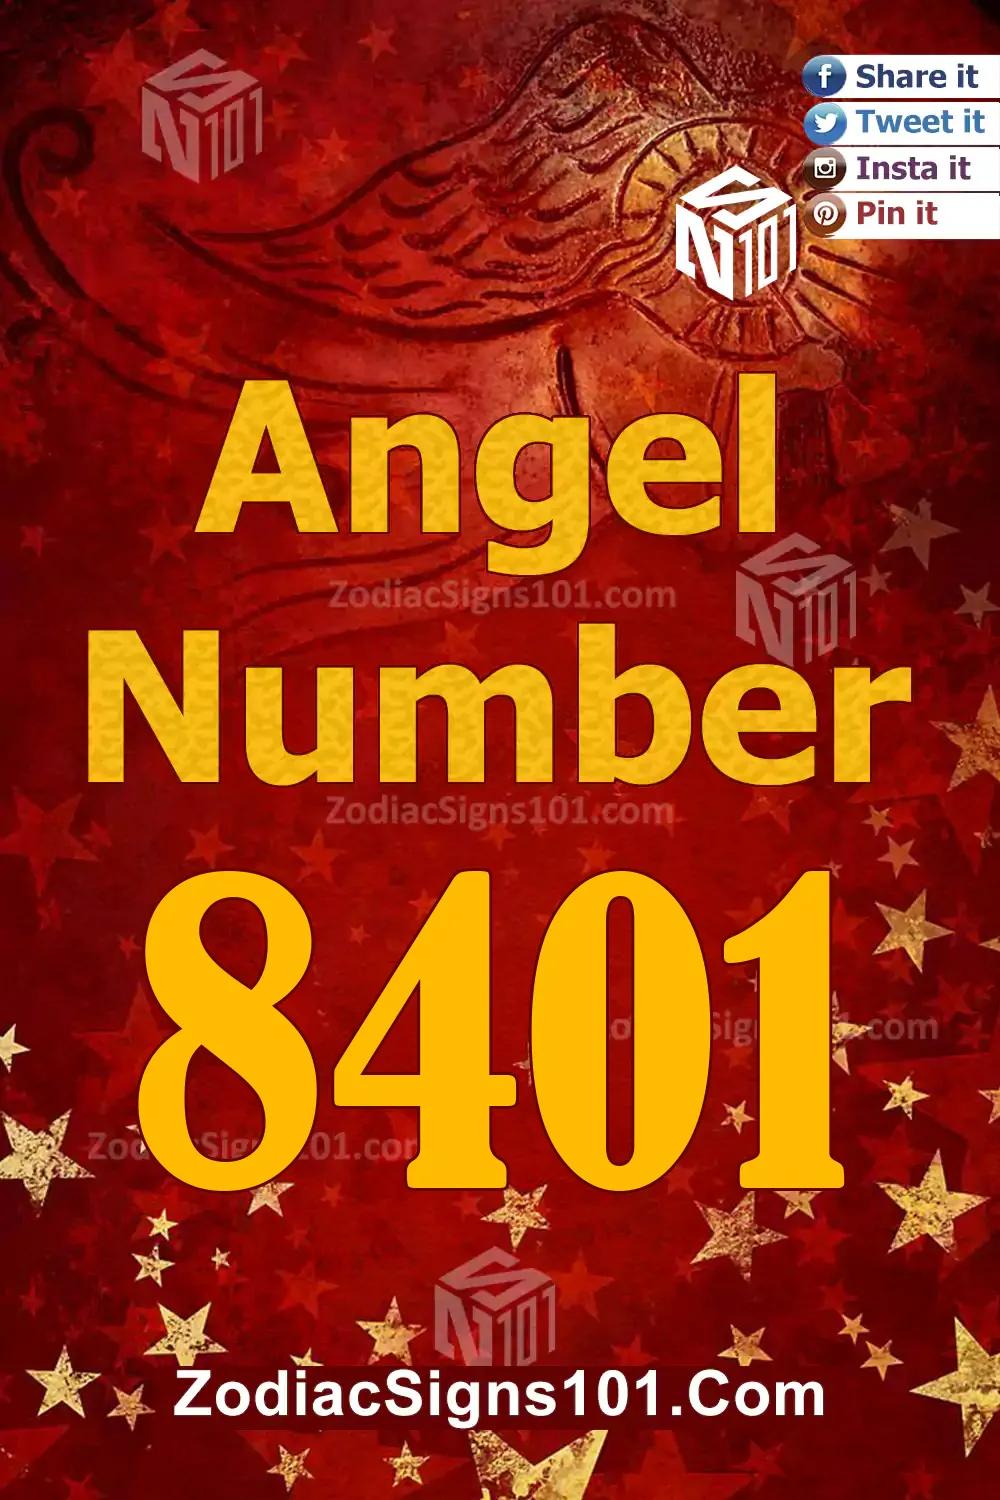 8401 Angel Number Meaning